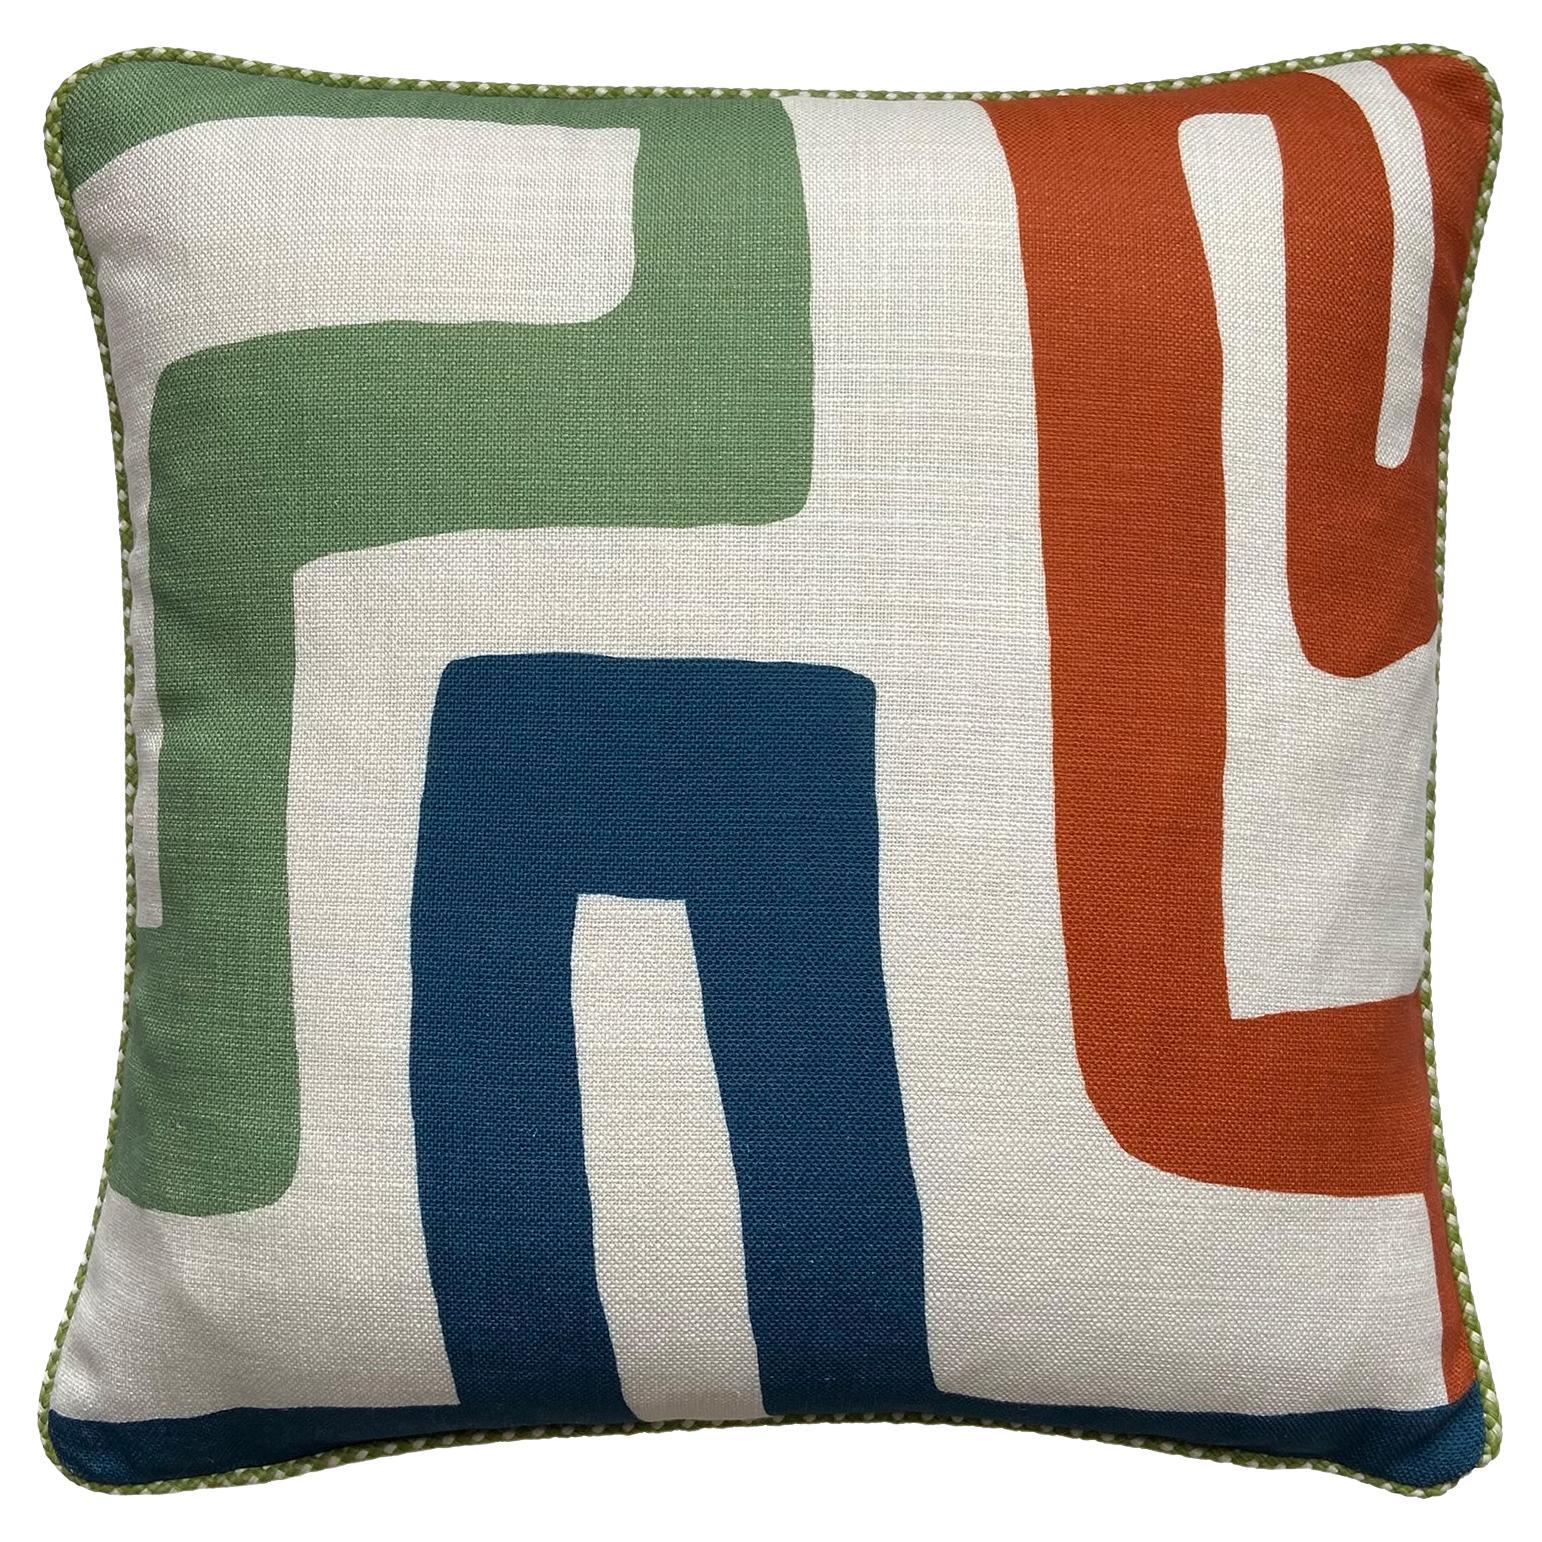 Cora White Kuba Linen Piped Cushion For Sale